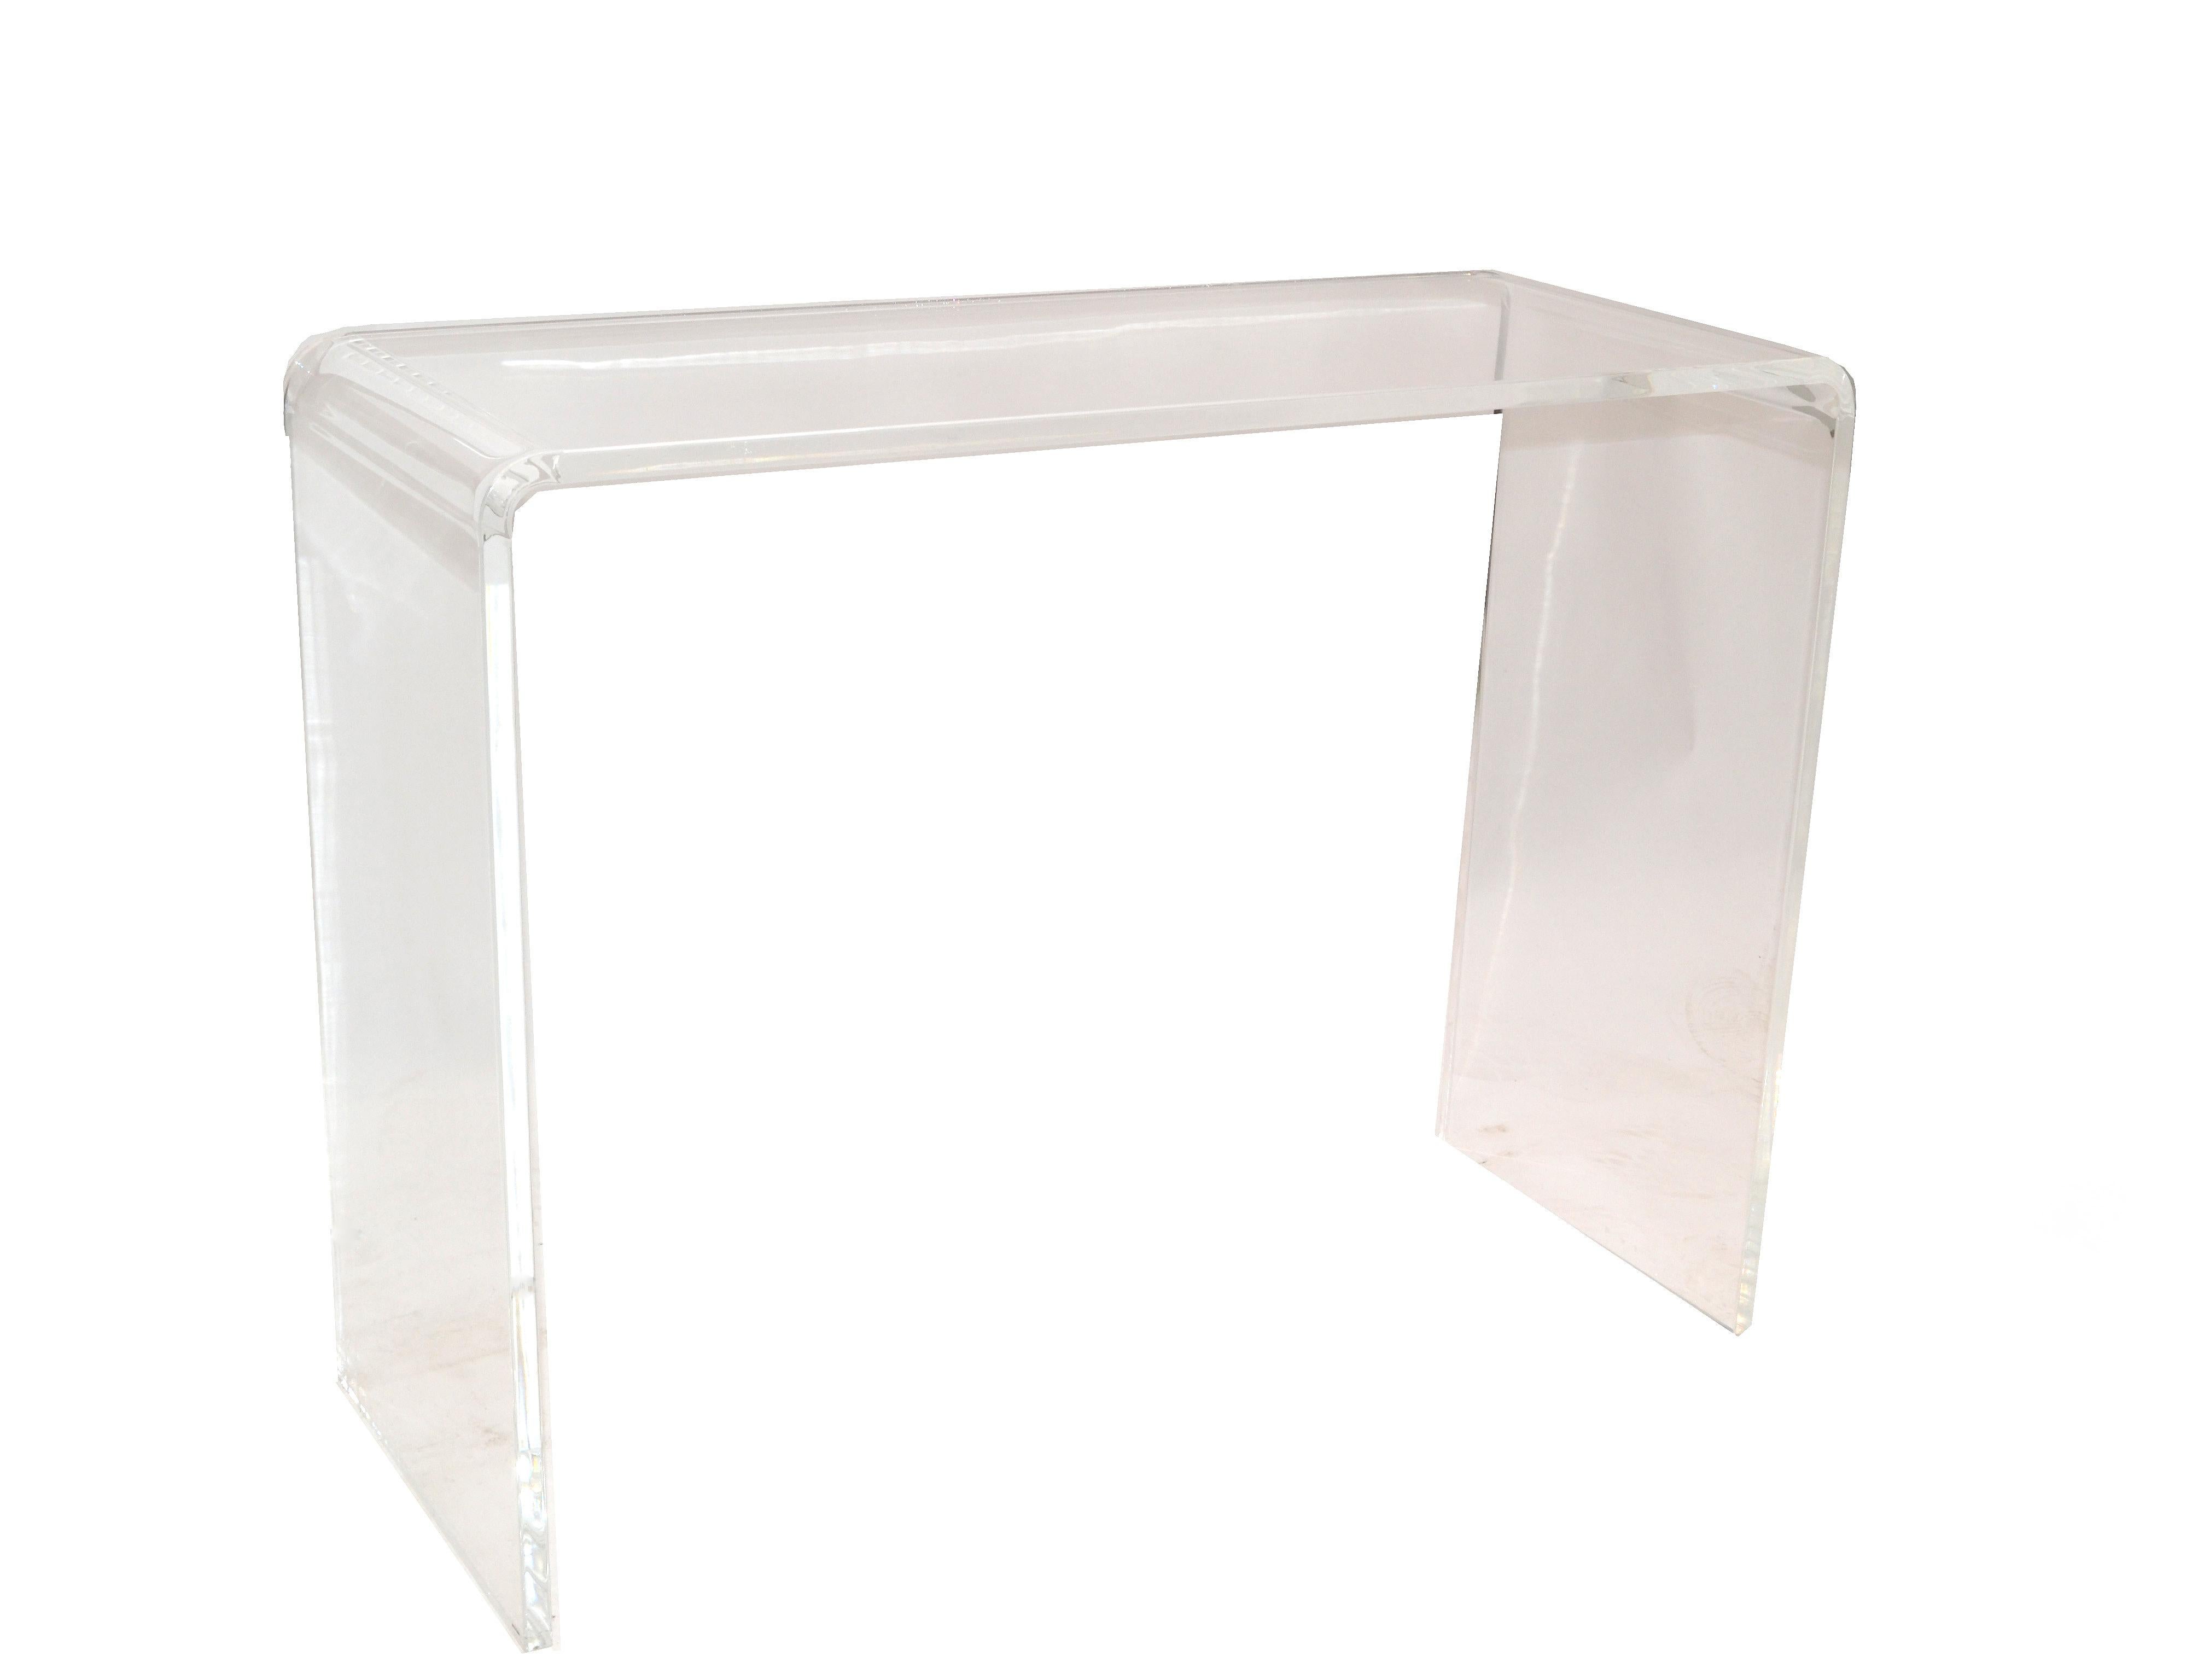 Mid-Century Modern transparent waterfall Lucite console table or hallway table.
The Lucite is 3/4 inches thick.
A great Mid-Century Modern classics.